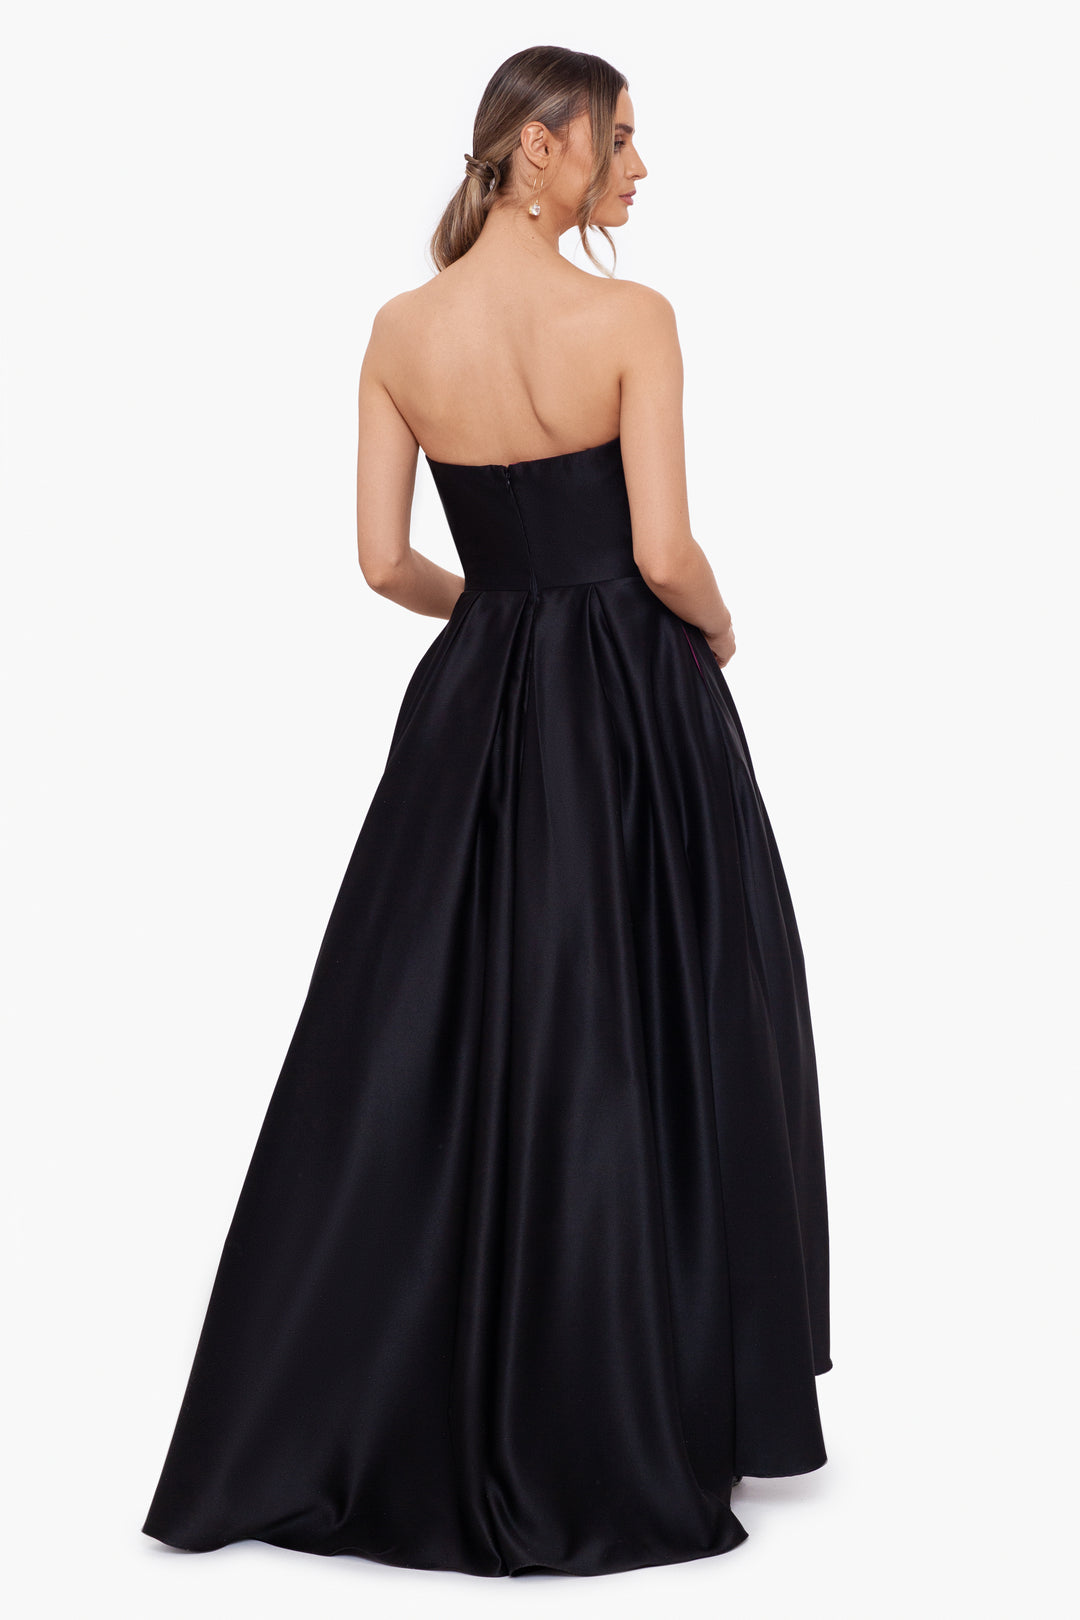 "Millie" Long Strapless High Low Cut Out Ball Gown